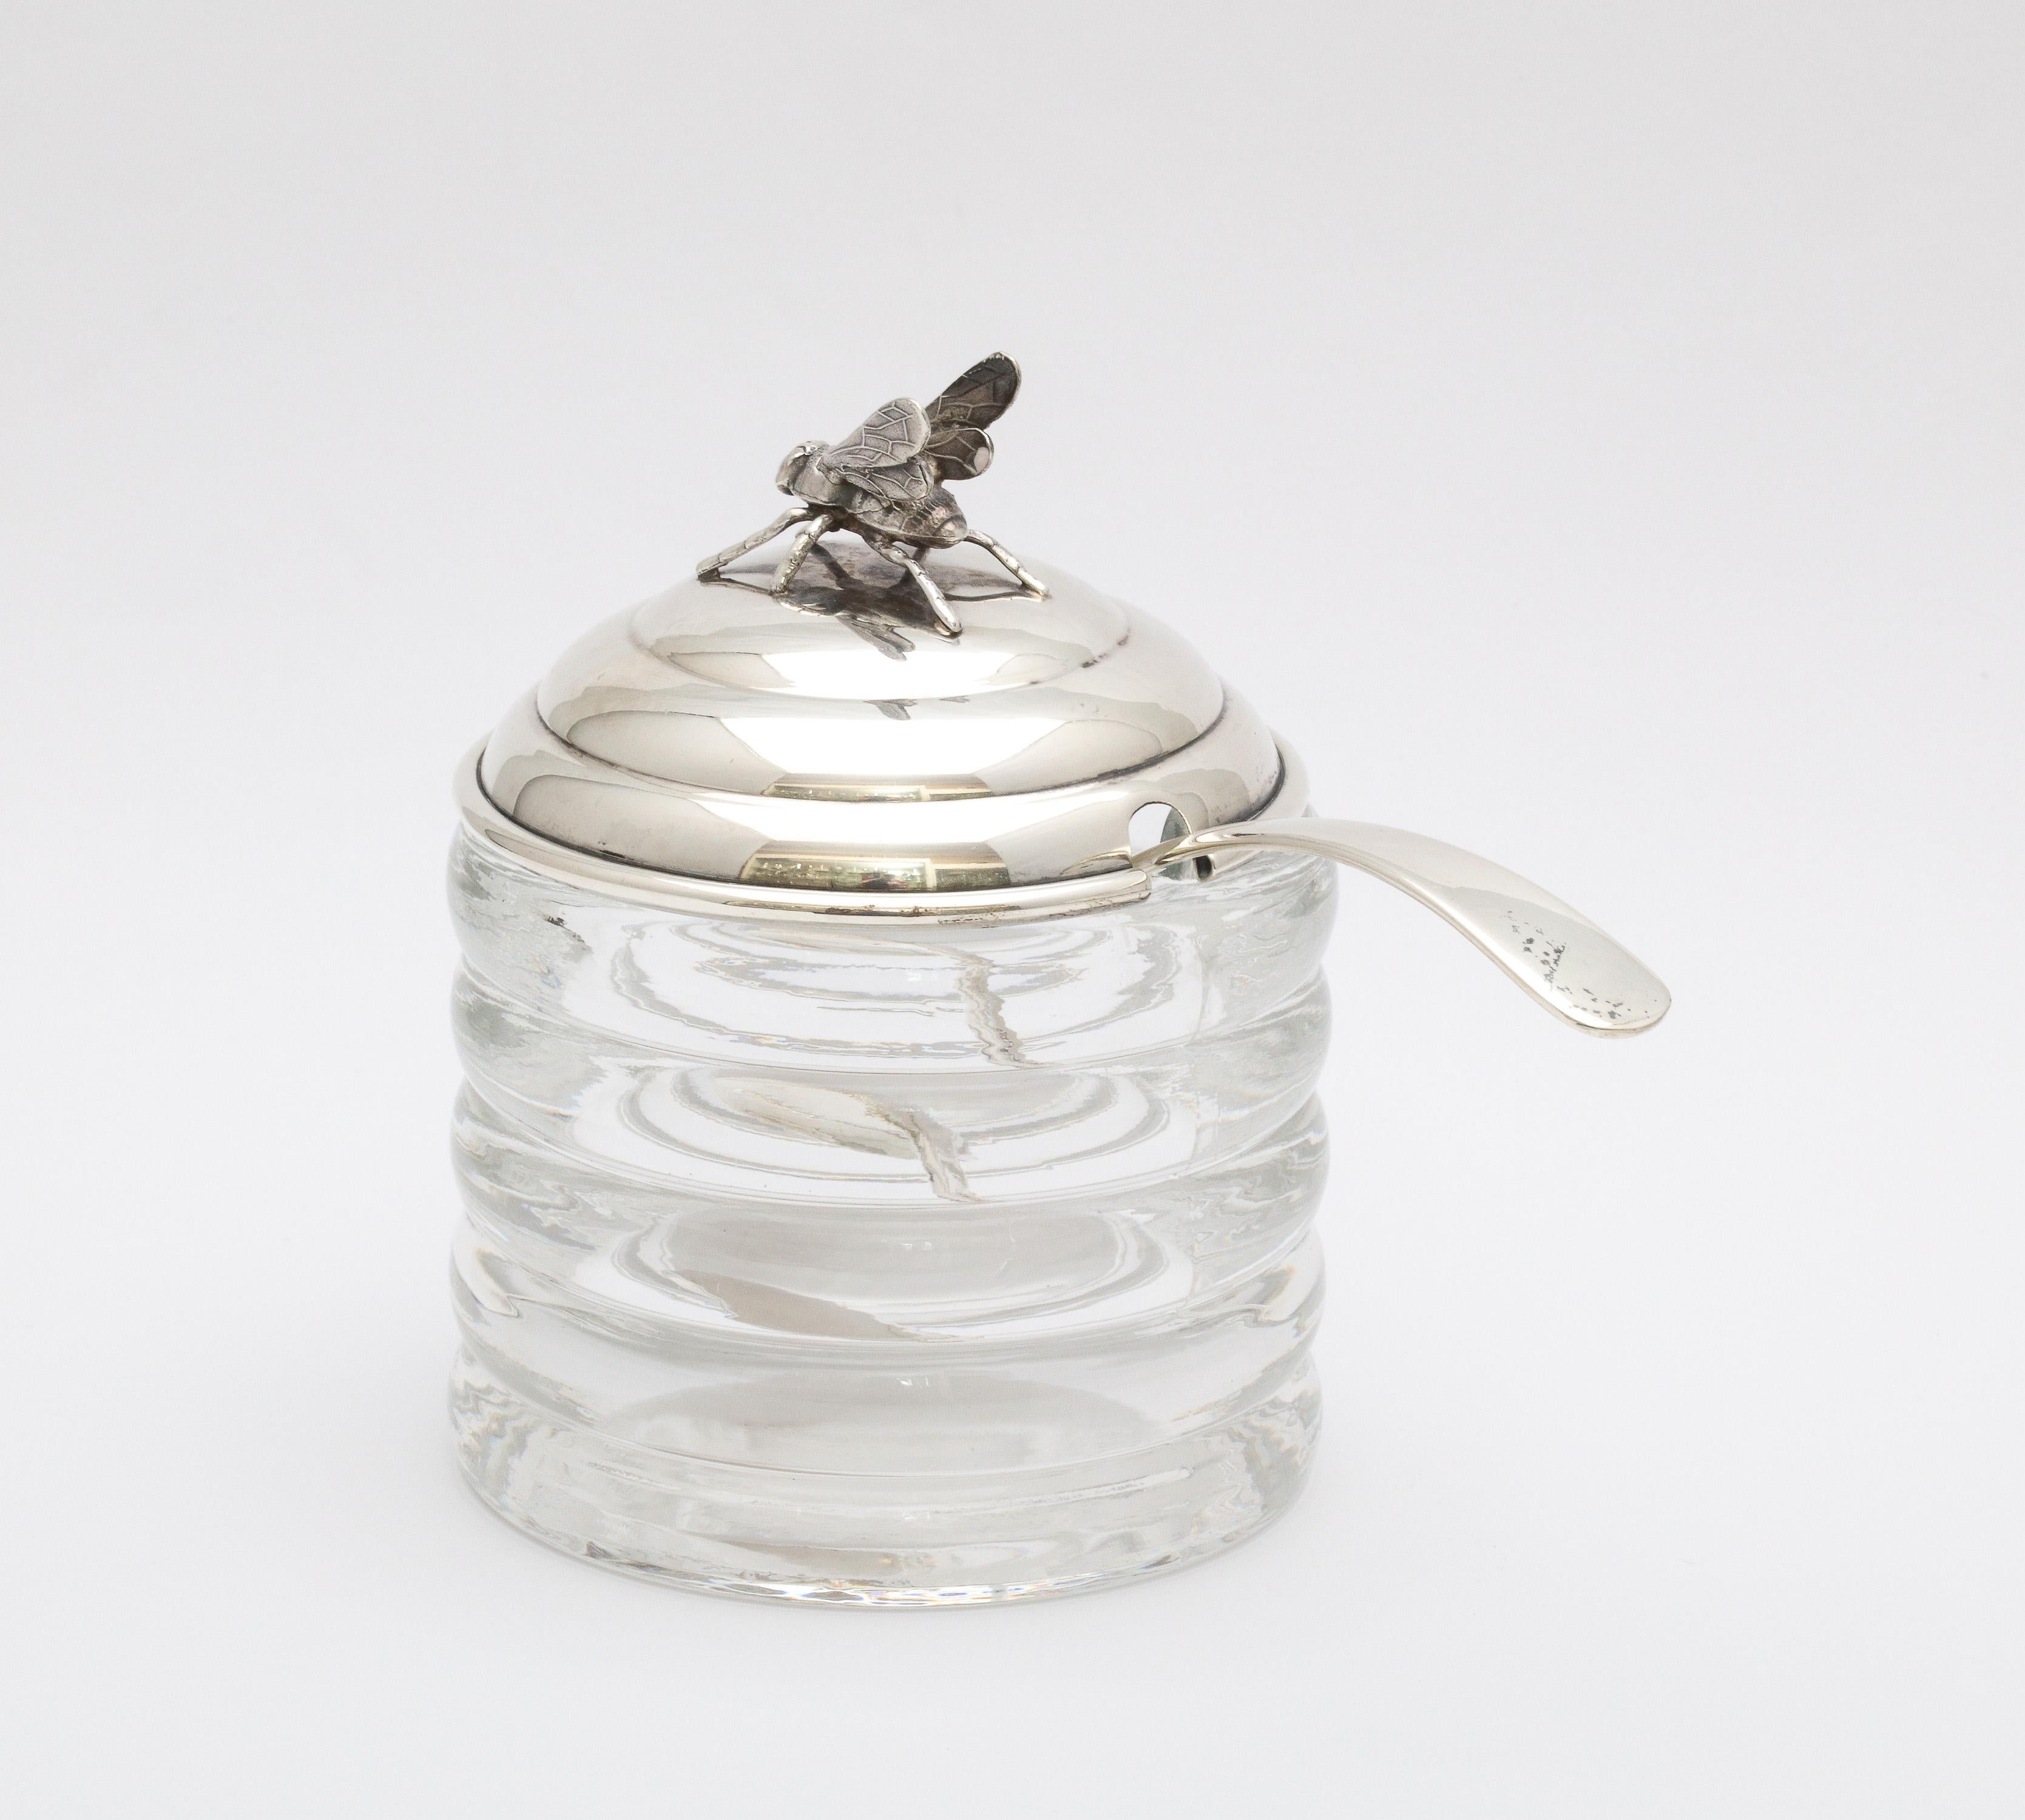 Mid-20th Century Art Deco Period Sterling Silver-Mounted Beehive-Form Honey Jar With Spoon